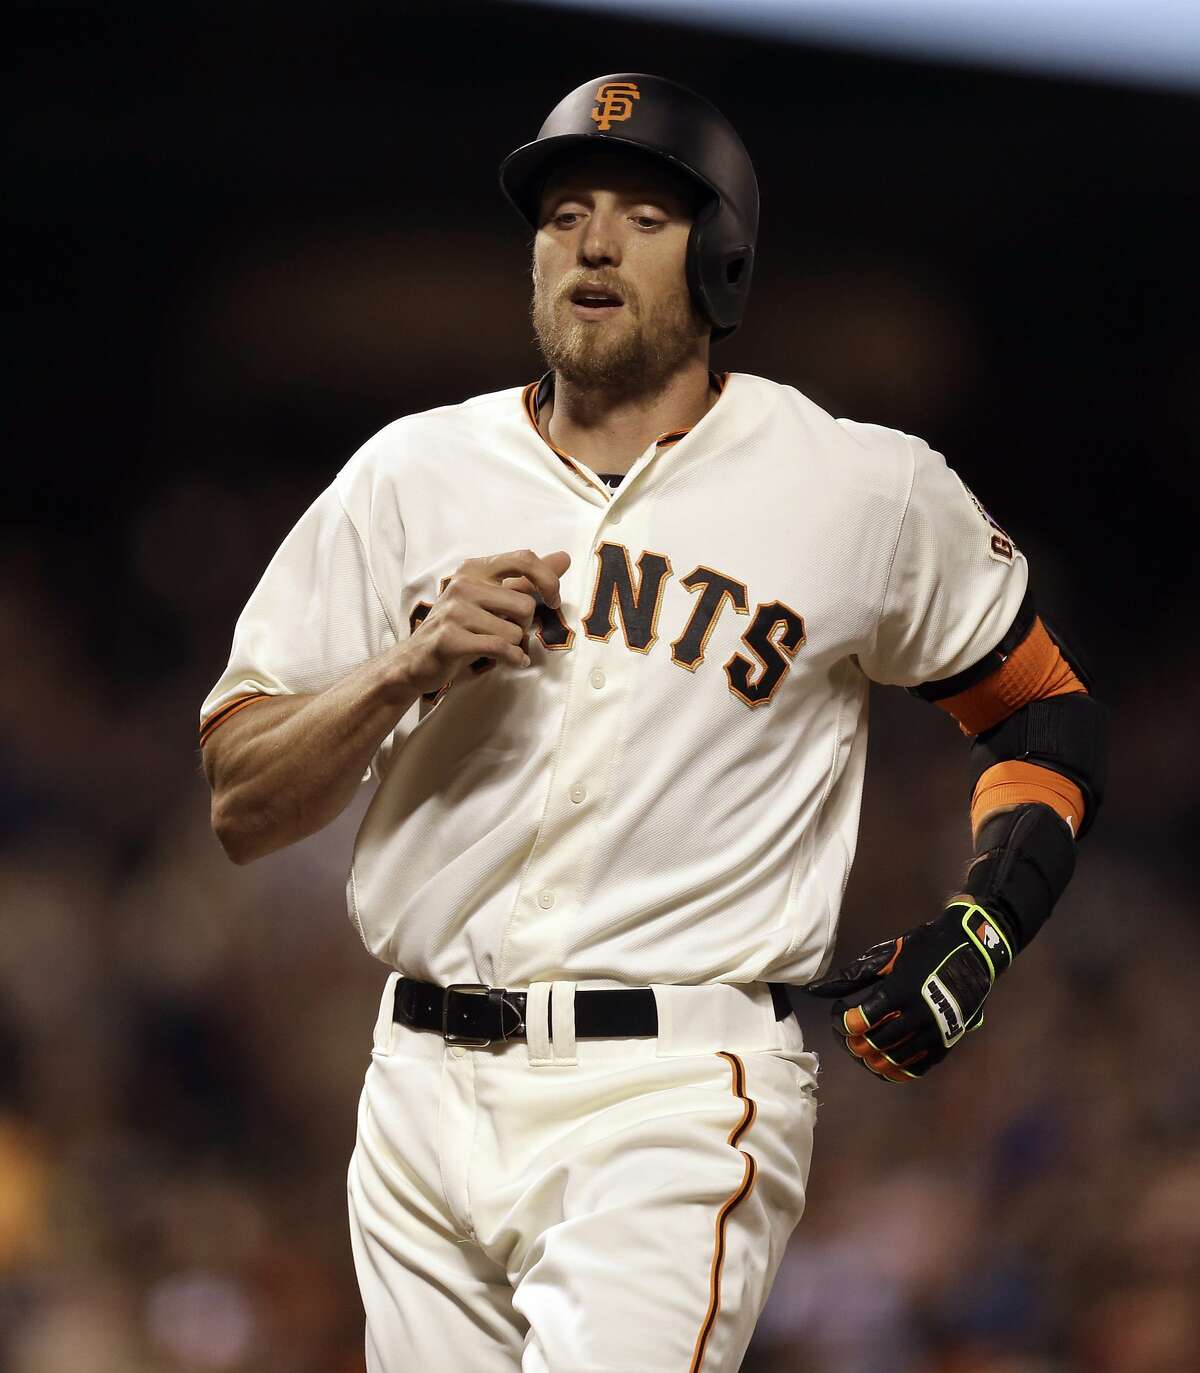 San Francisco Giants' Hunter Pence runs the bases after hitting a home run off San Diego Padres' Drew Pomeranz in the fourth inning of a baseball game Monday, April 25, 2016, in San Francisco. (AP Photo/Ben Margot)